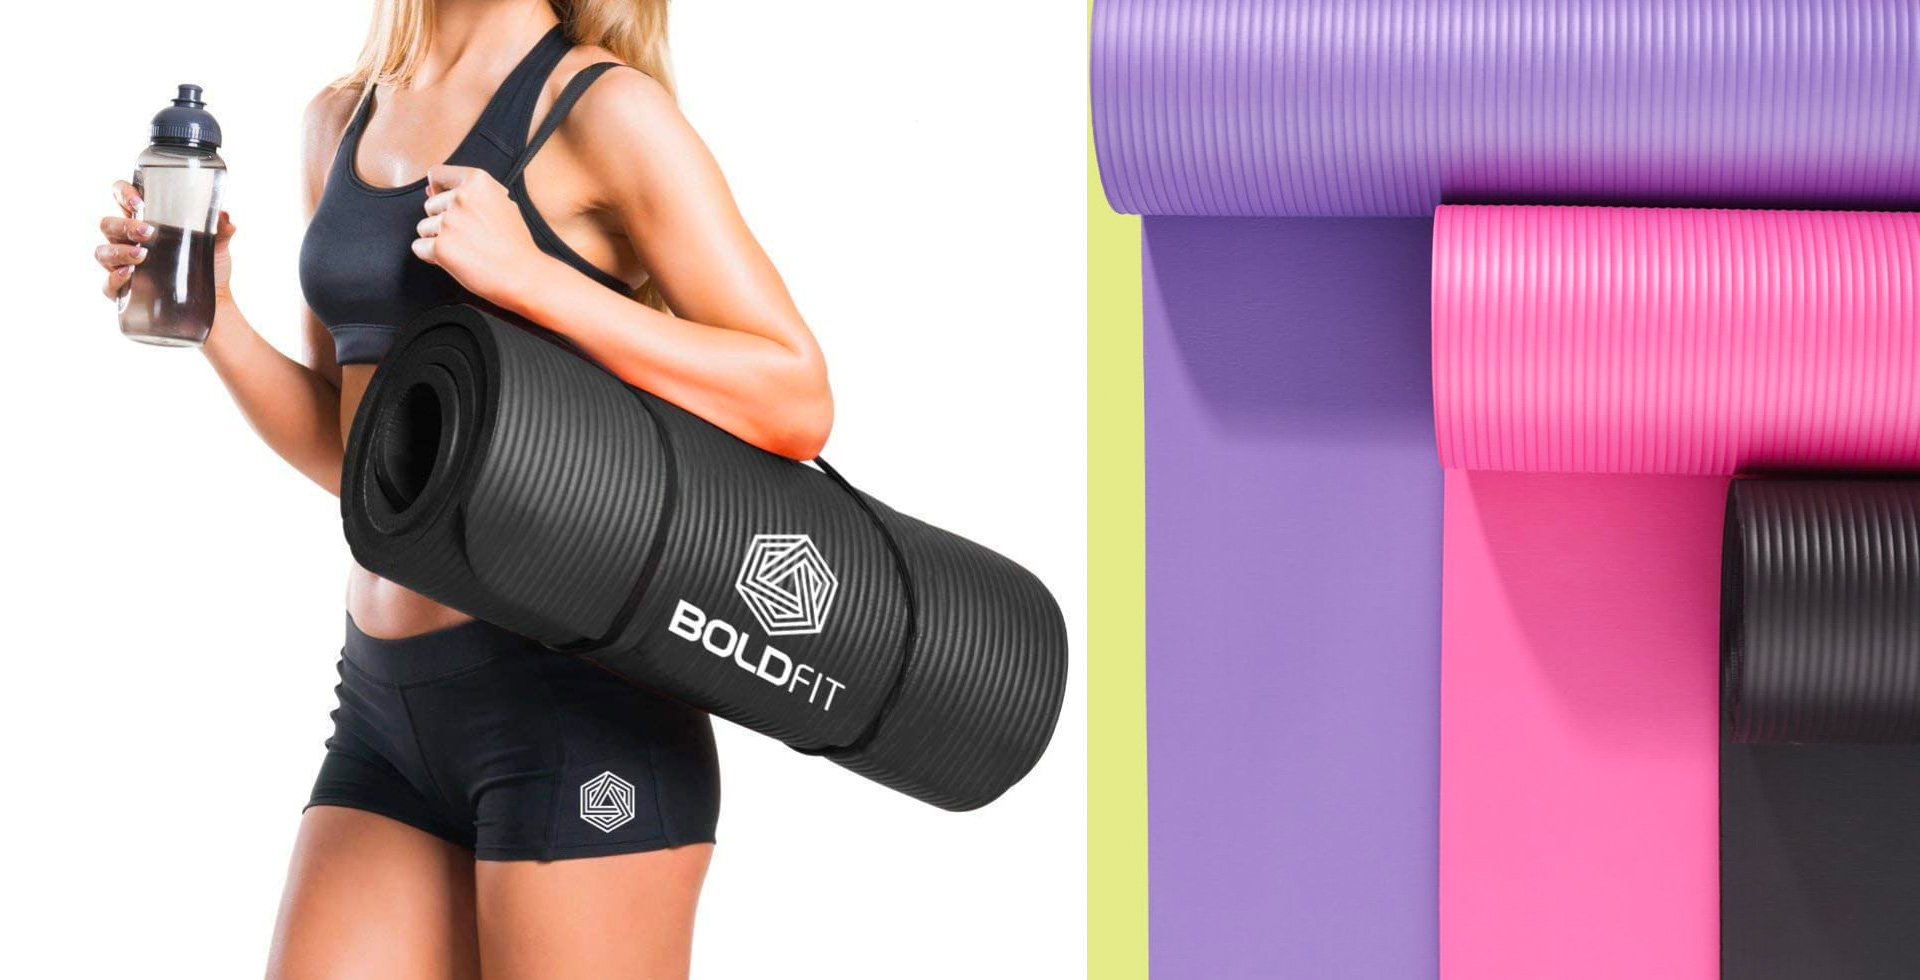 Yoga Mats for Women and Men NBR Material with Carrying Strap